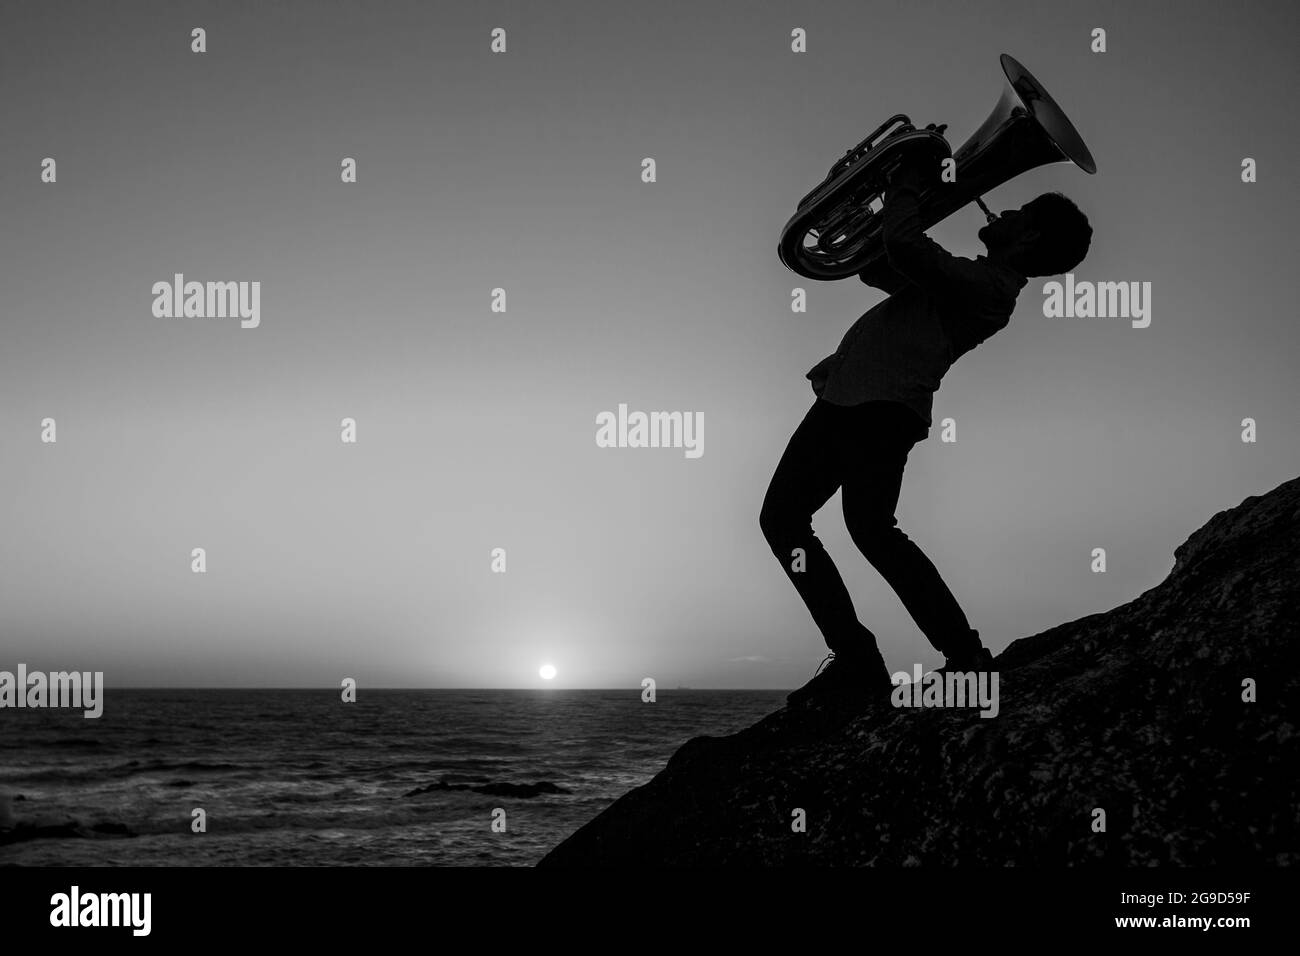 Silhouette of a musician with a trumpet on the seashore. Black and white photo. Stock Photo